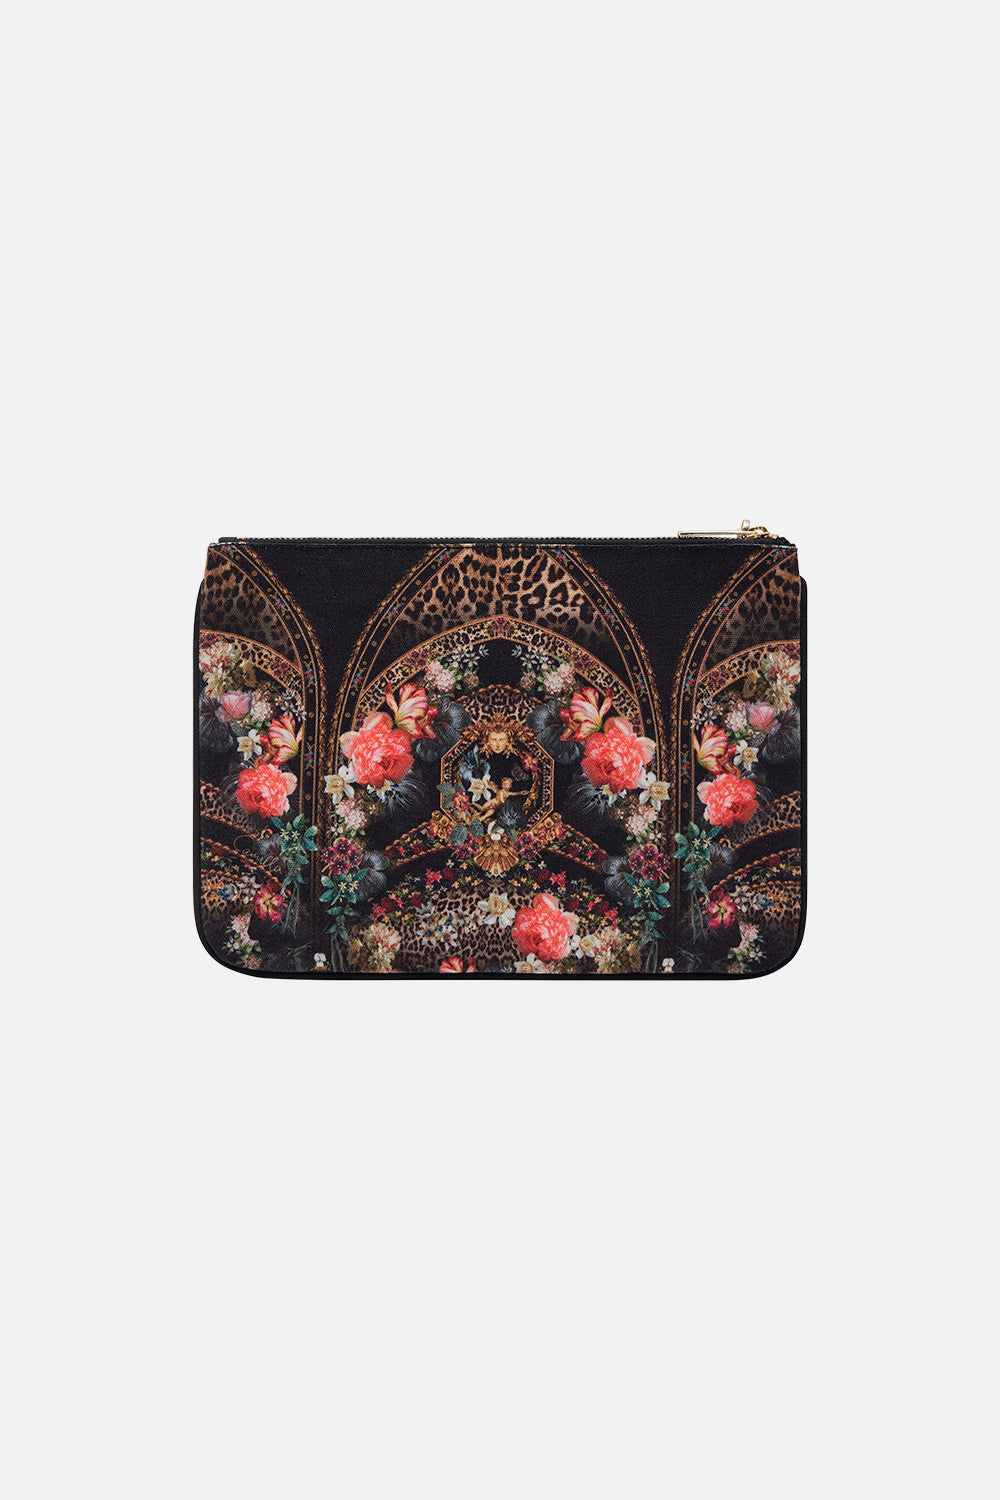 Product view of CAMILLA small clutch in A Night At The Opera print